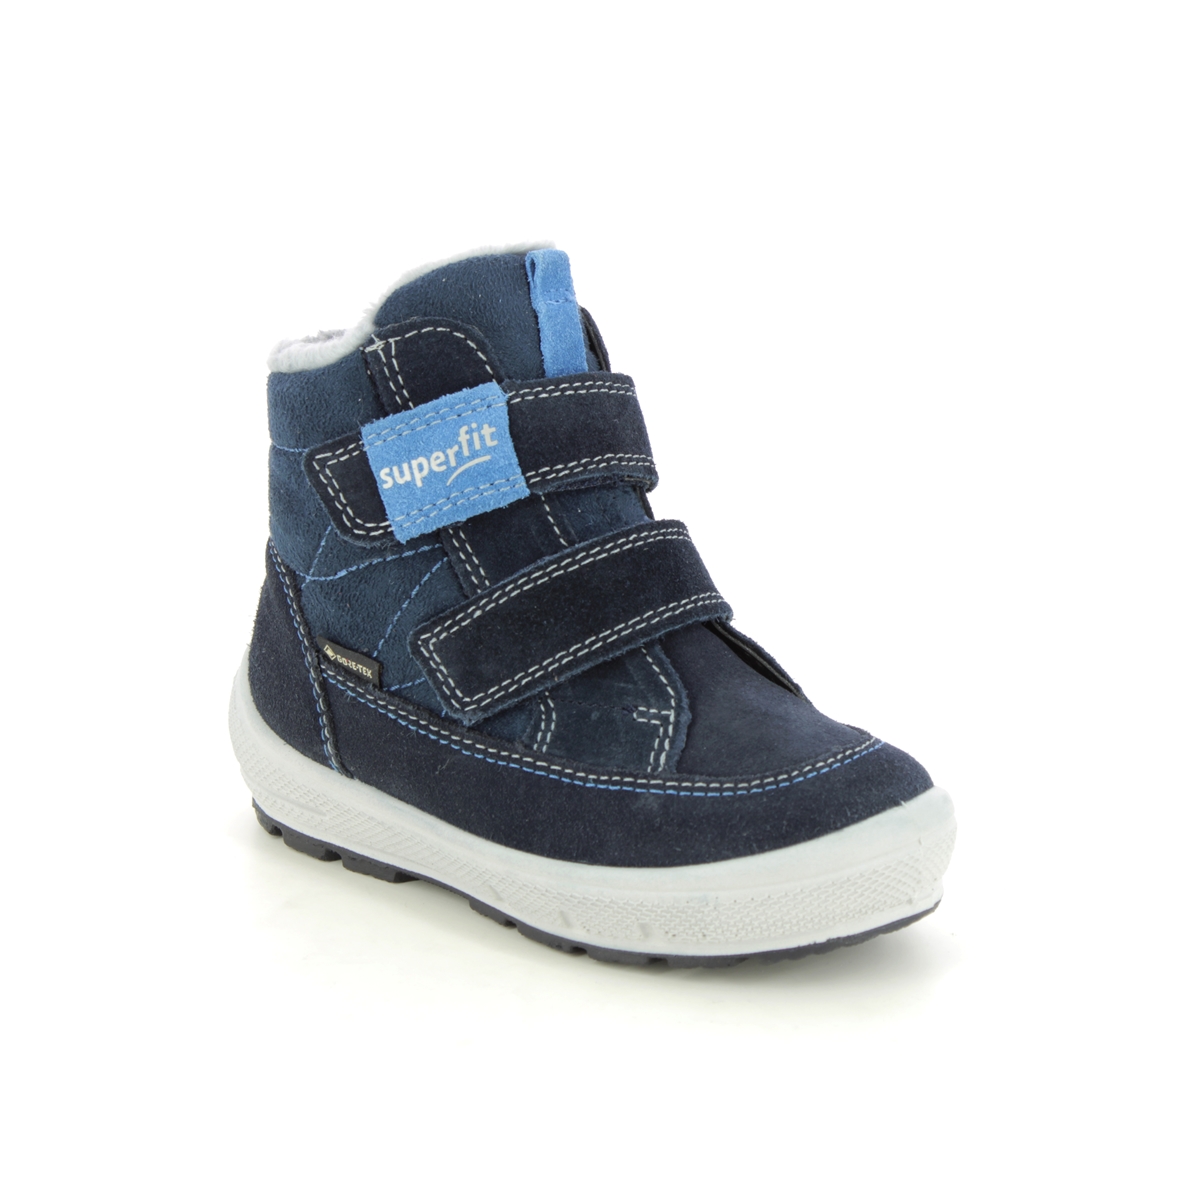 Superfit Groovy Gtx Navy Kids Toddler Boys Boots 1009314-8000 In Size 27 In Plain Navy